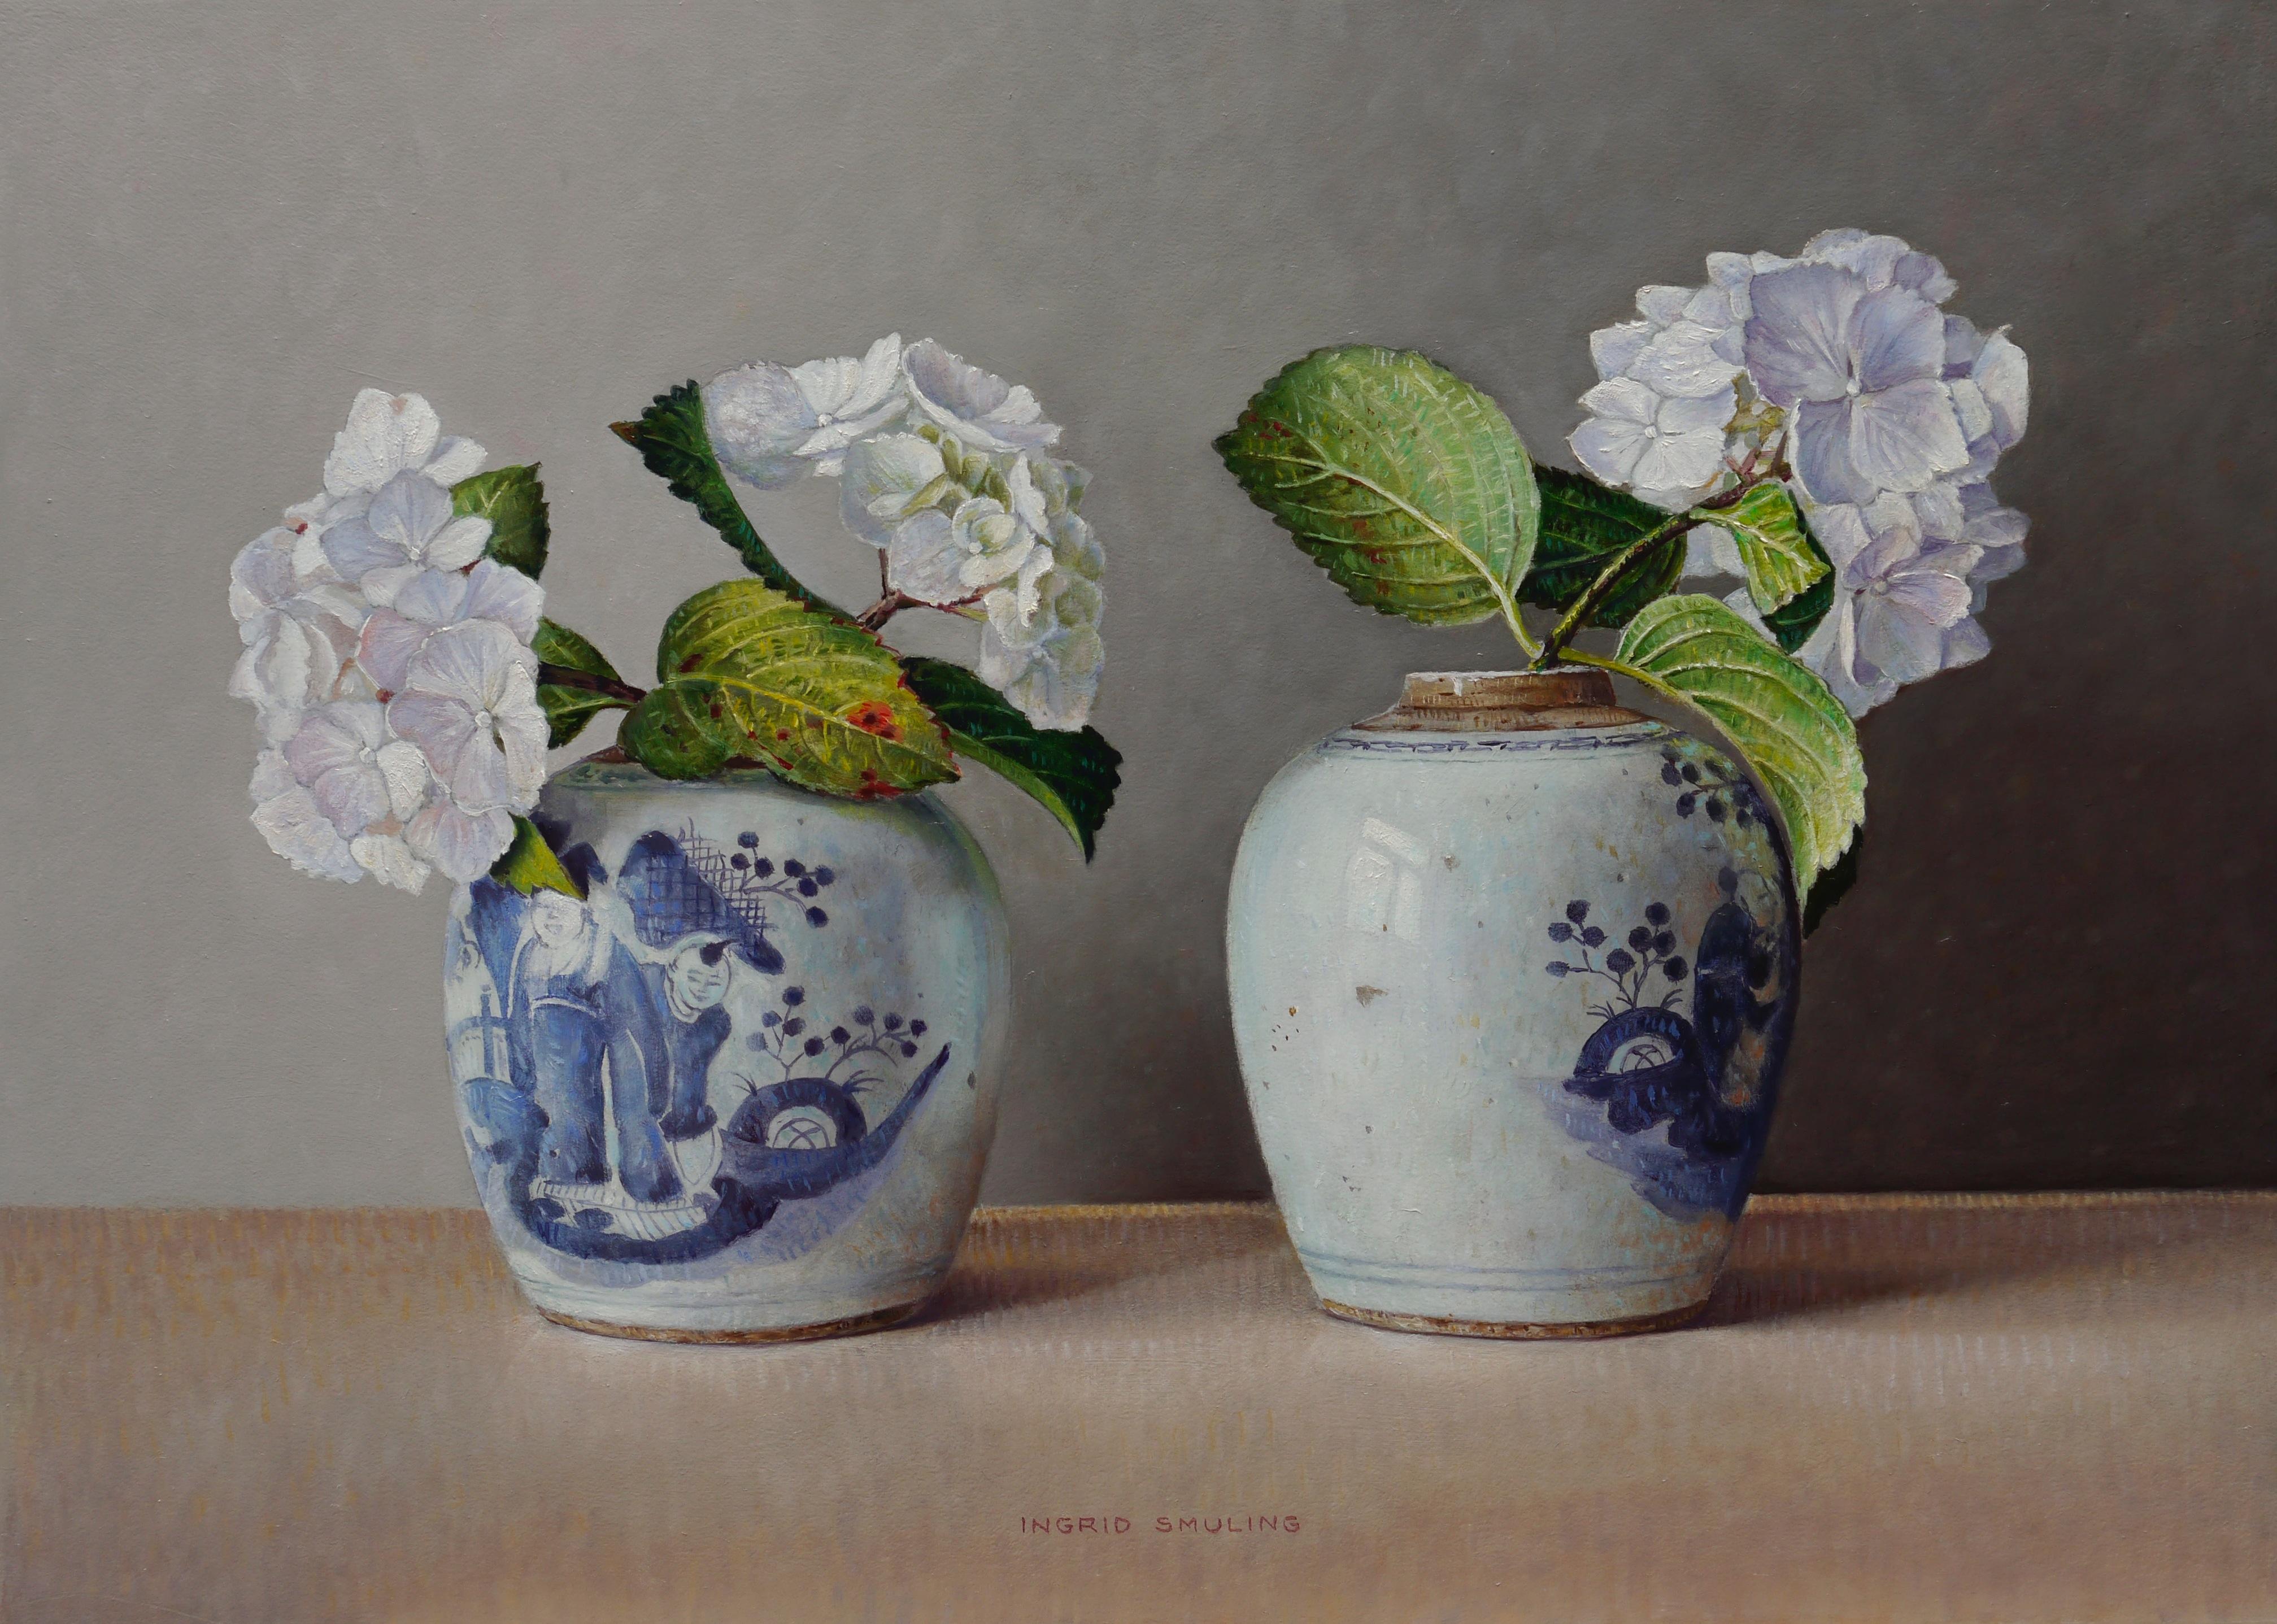 Ingrid Smuling Still-Life Painting - White Hydrangea's in Chinese Pots - 21st Century Contemporary Still-Life